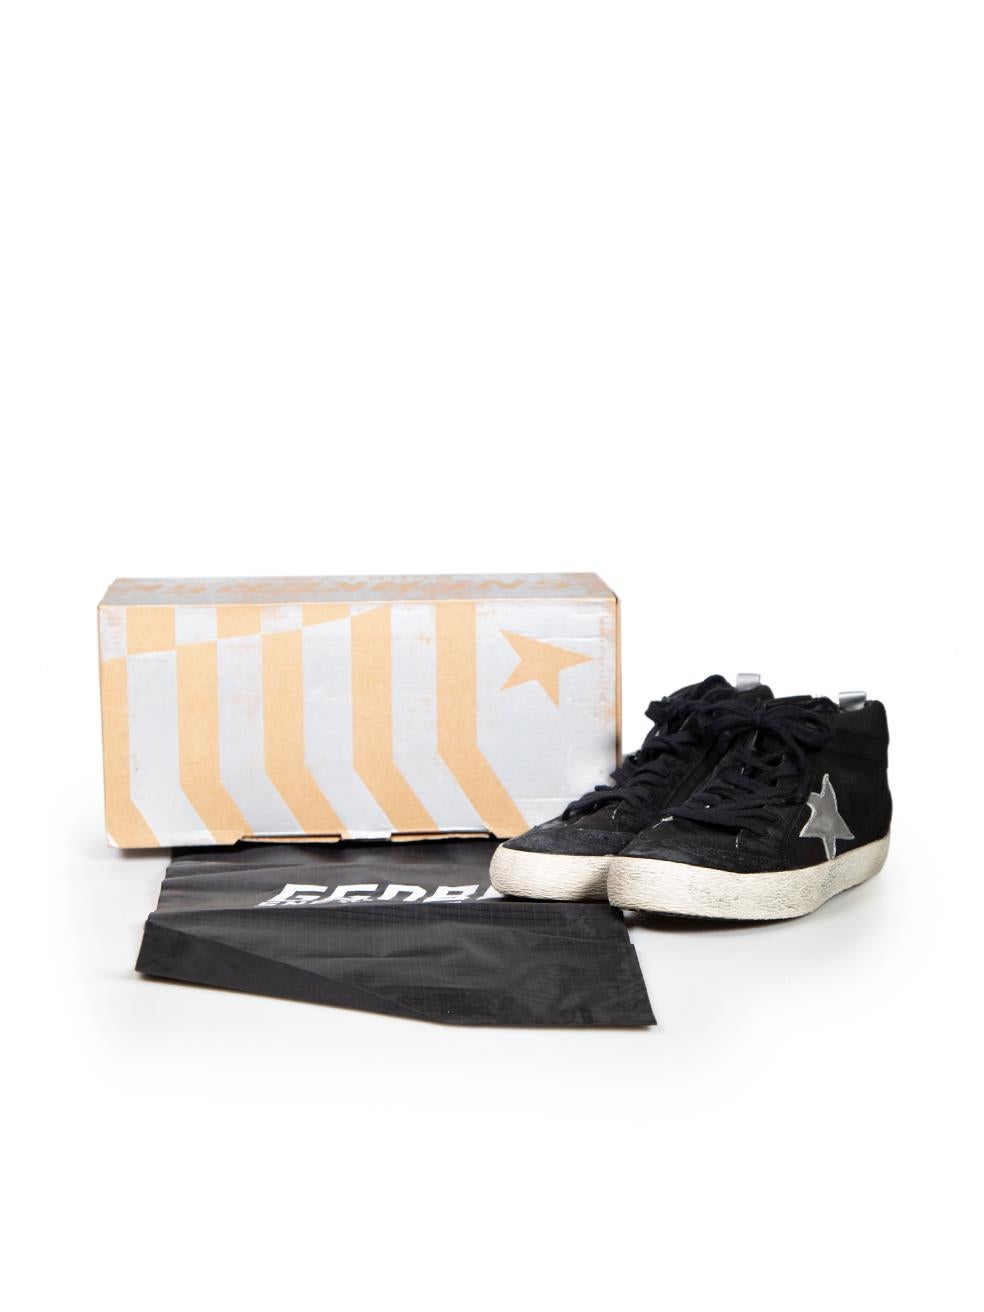 Golden Goose Black Suede Superstar Trainers Size IT 37 For Sale 3